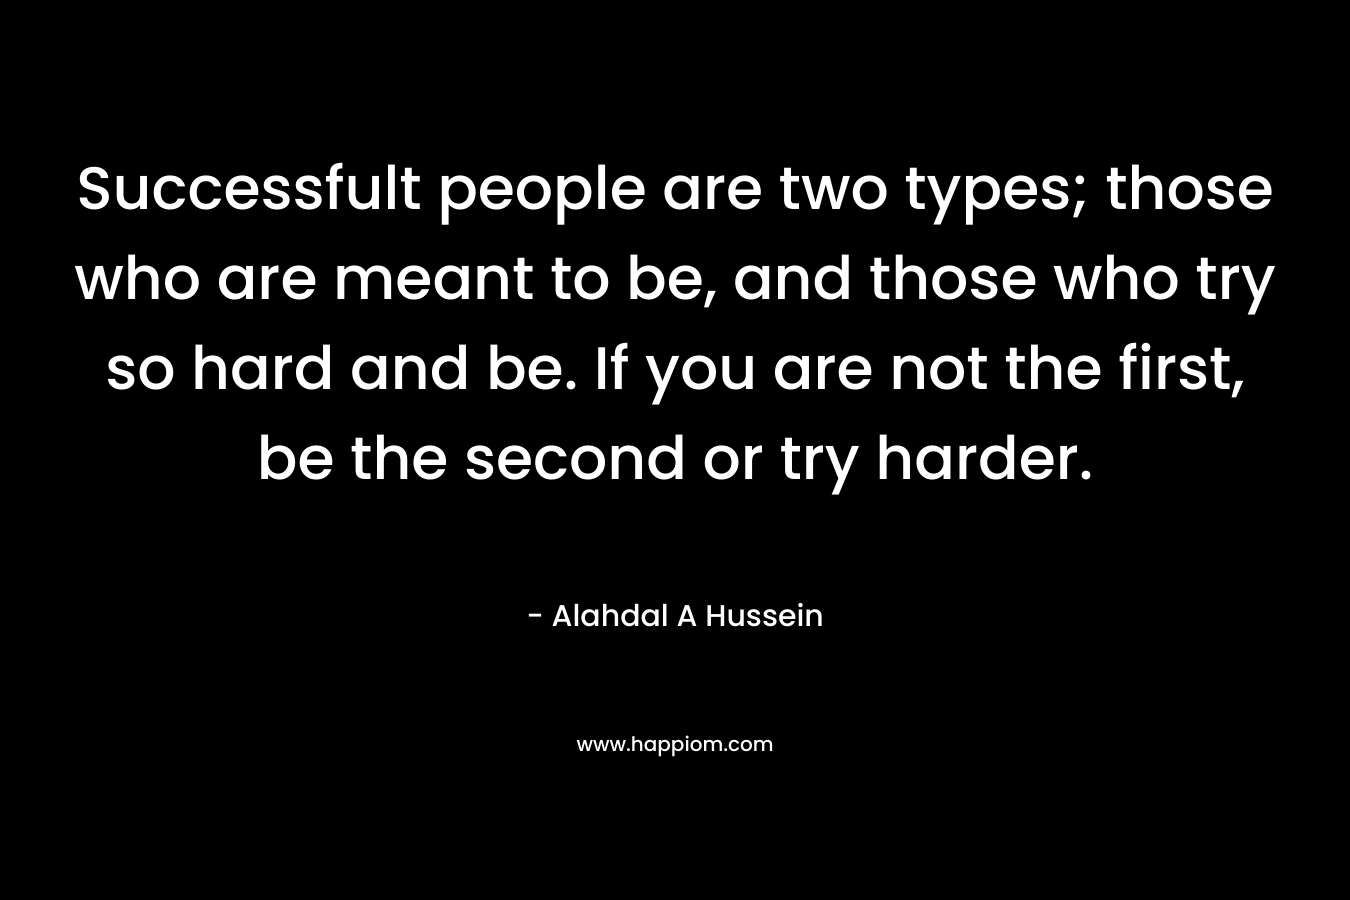 Successfult people are two types; those who are meant to be, and those who try so hard and be. If you are not the first, be the second or try harder. – Alahdal A Hussein